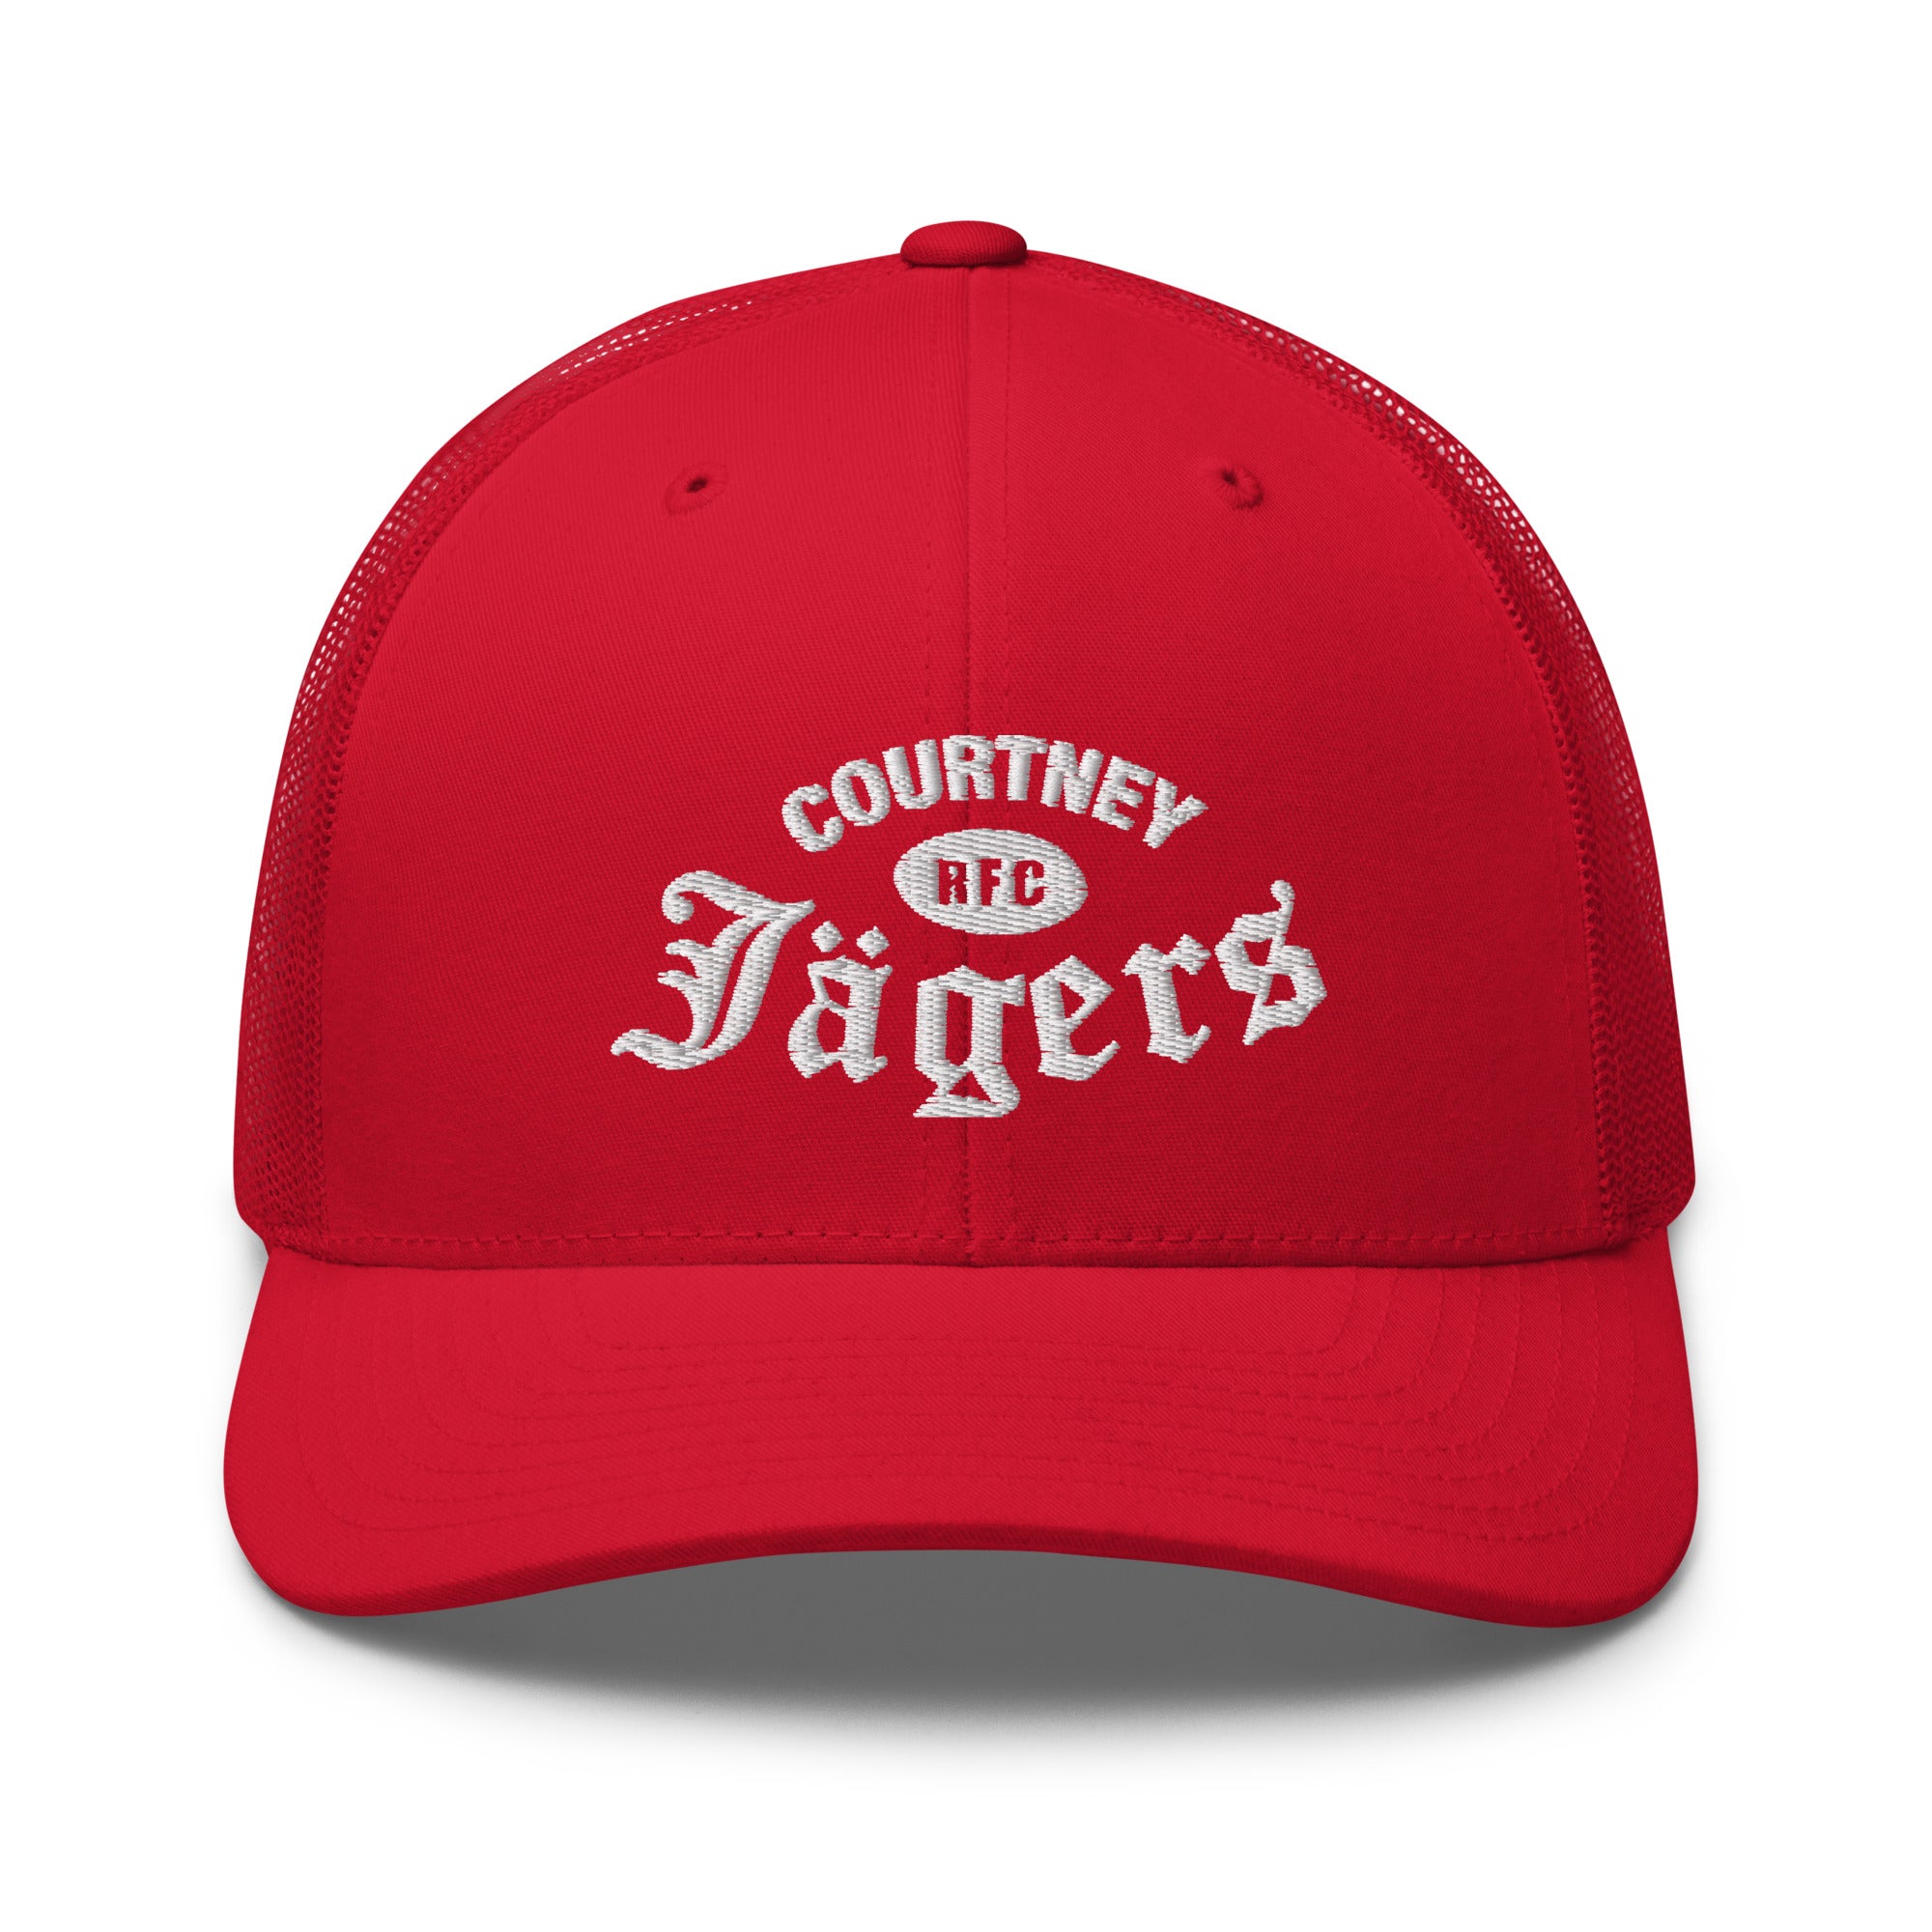 Rugby Imports Courtney RFC Jagers Trucker Cap